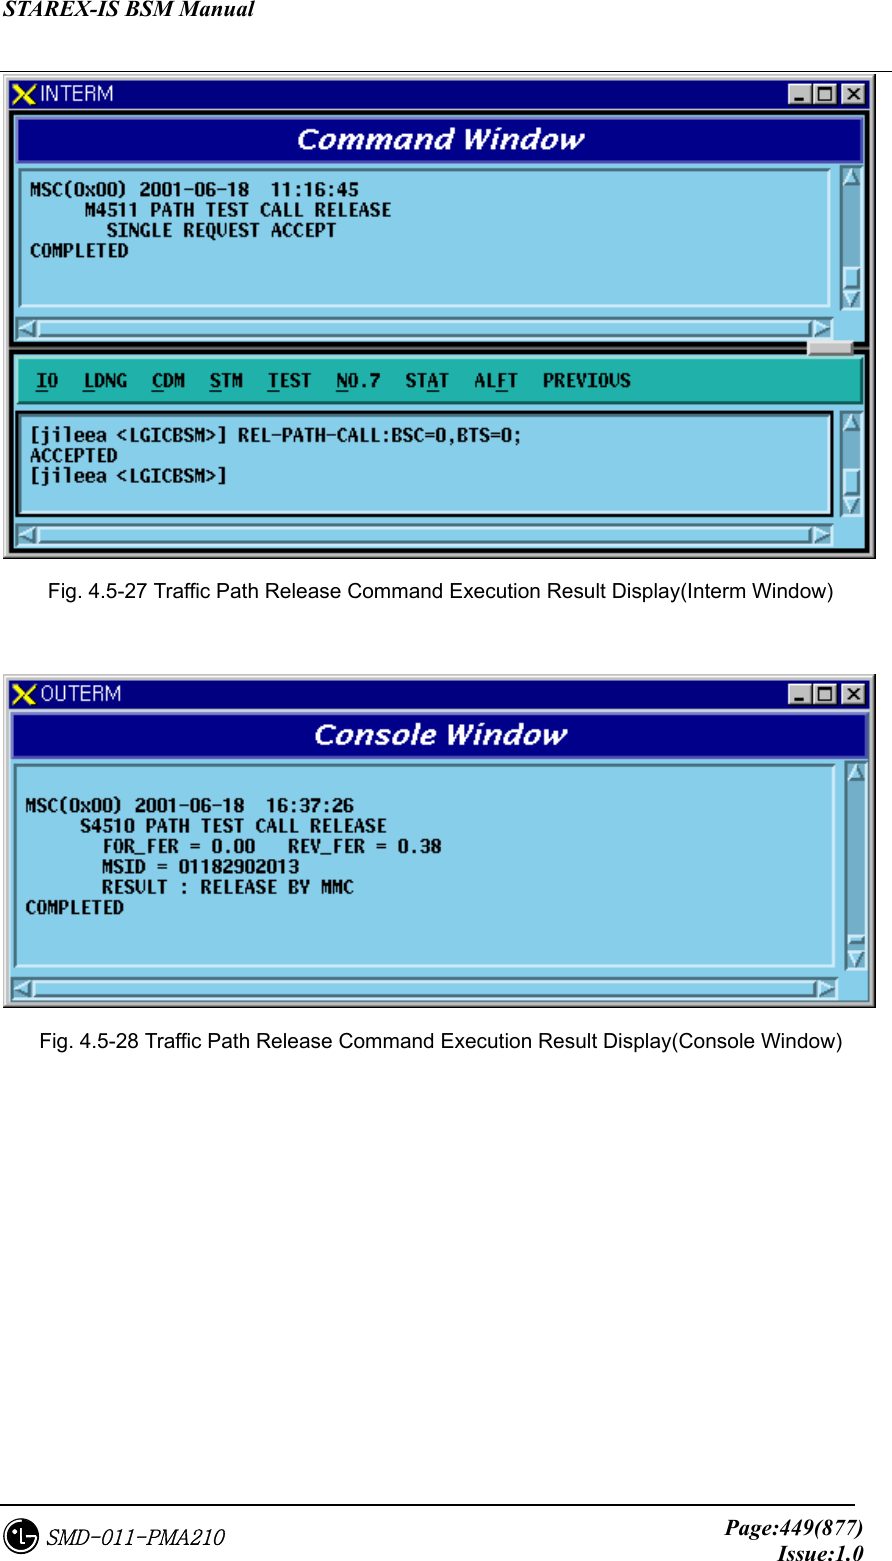 STAREX-IS BSM Manual     Page:449(877)Issue:1.0SMD-011-PMA210  Fig. 4.5-27 Traffic Path Release Command Execution Result Display(Interm Window)   Fig. 4.5-28 Traffic Path Release Command Execution Result Display(Console Window)  